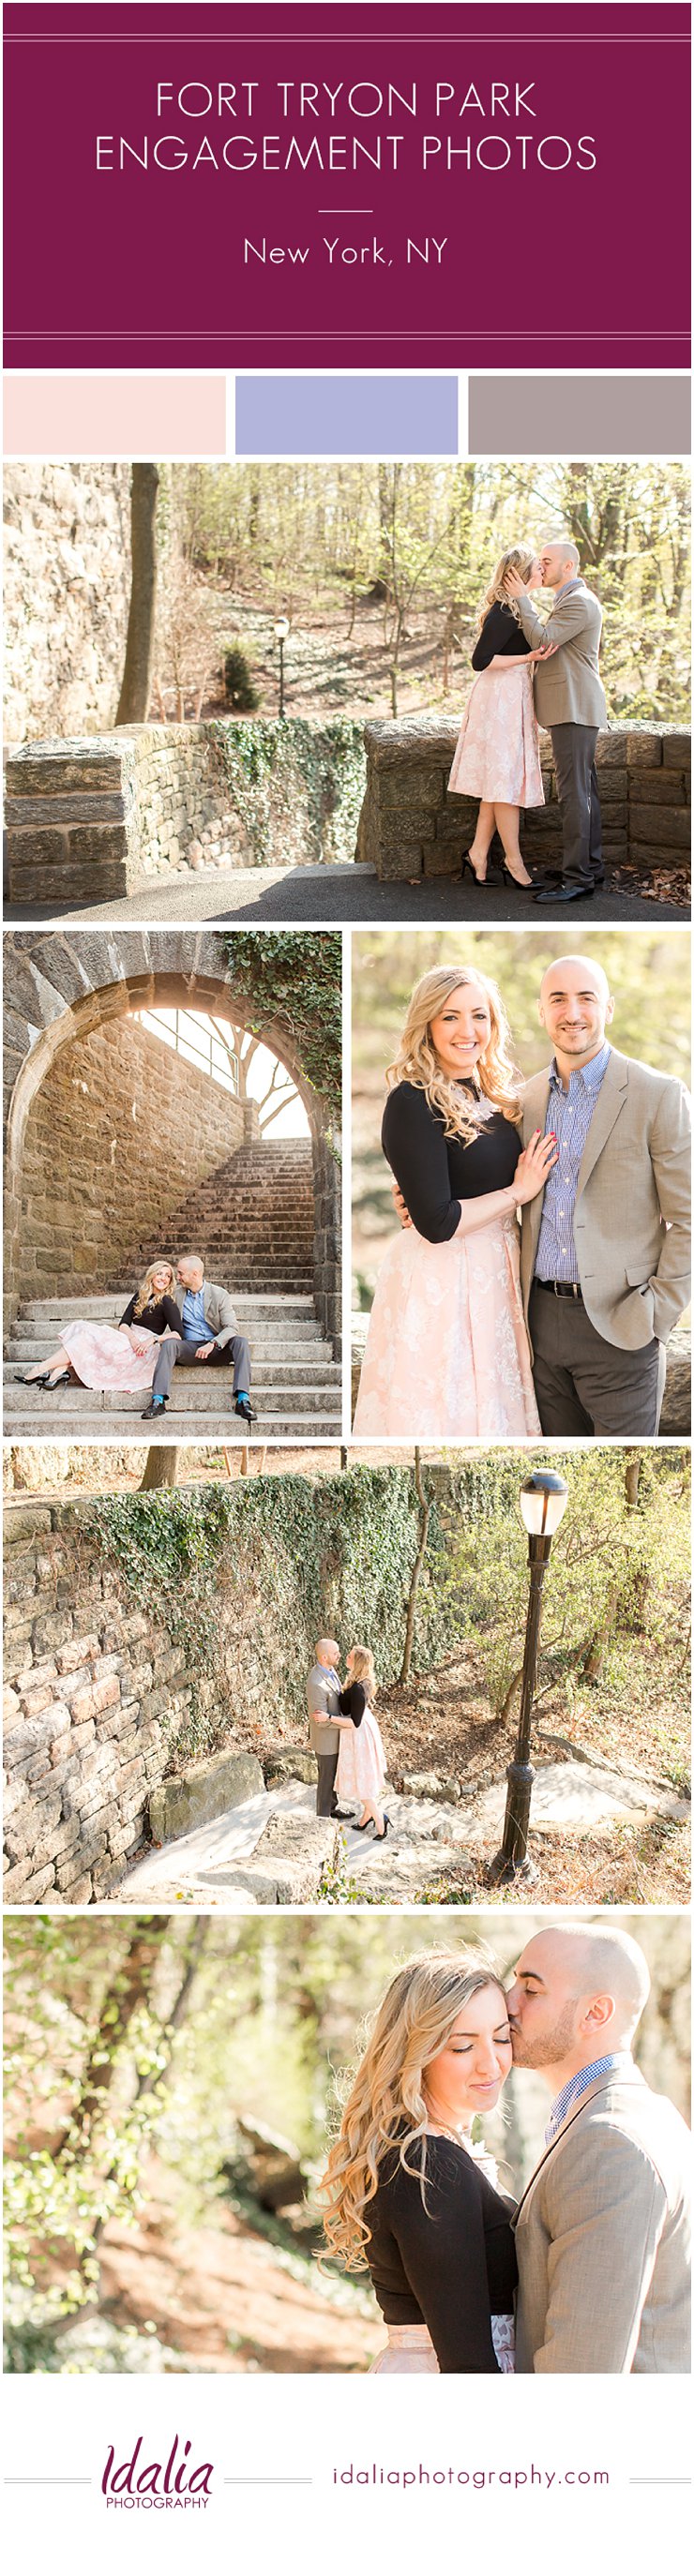 Fort Tryon Park Engagement Photos | NYC Engagement